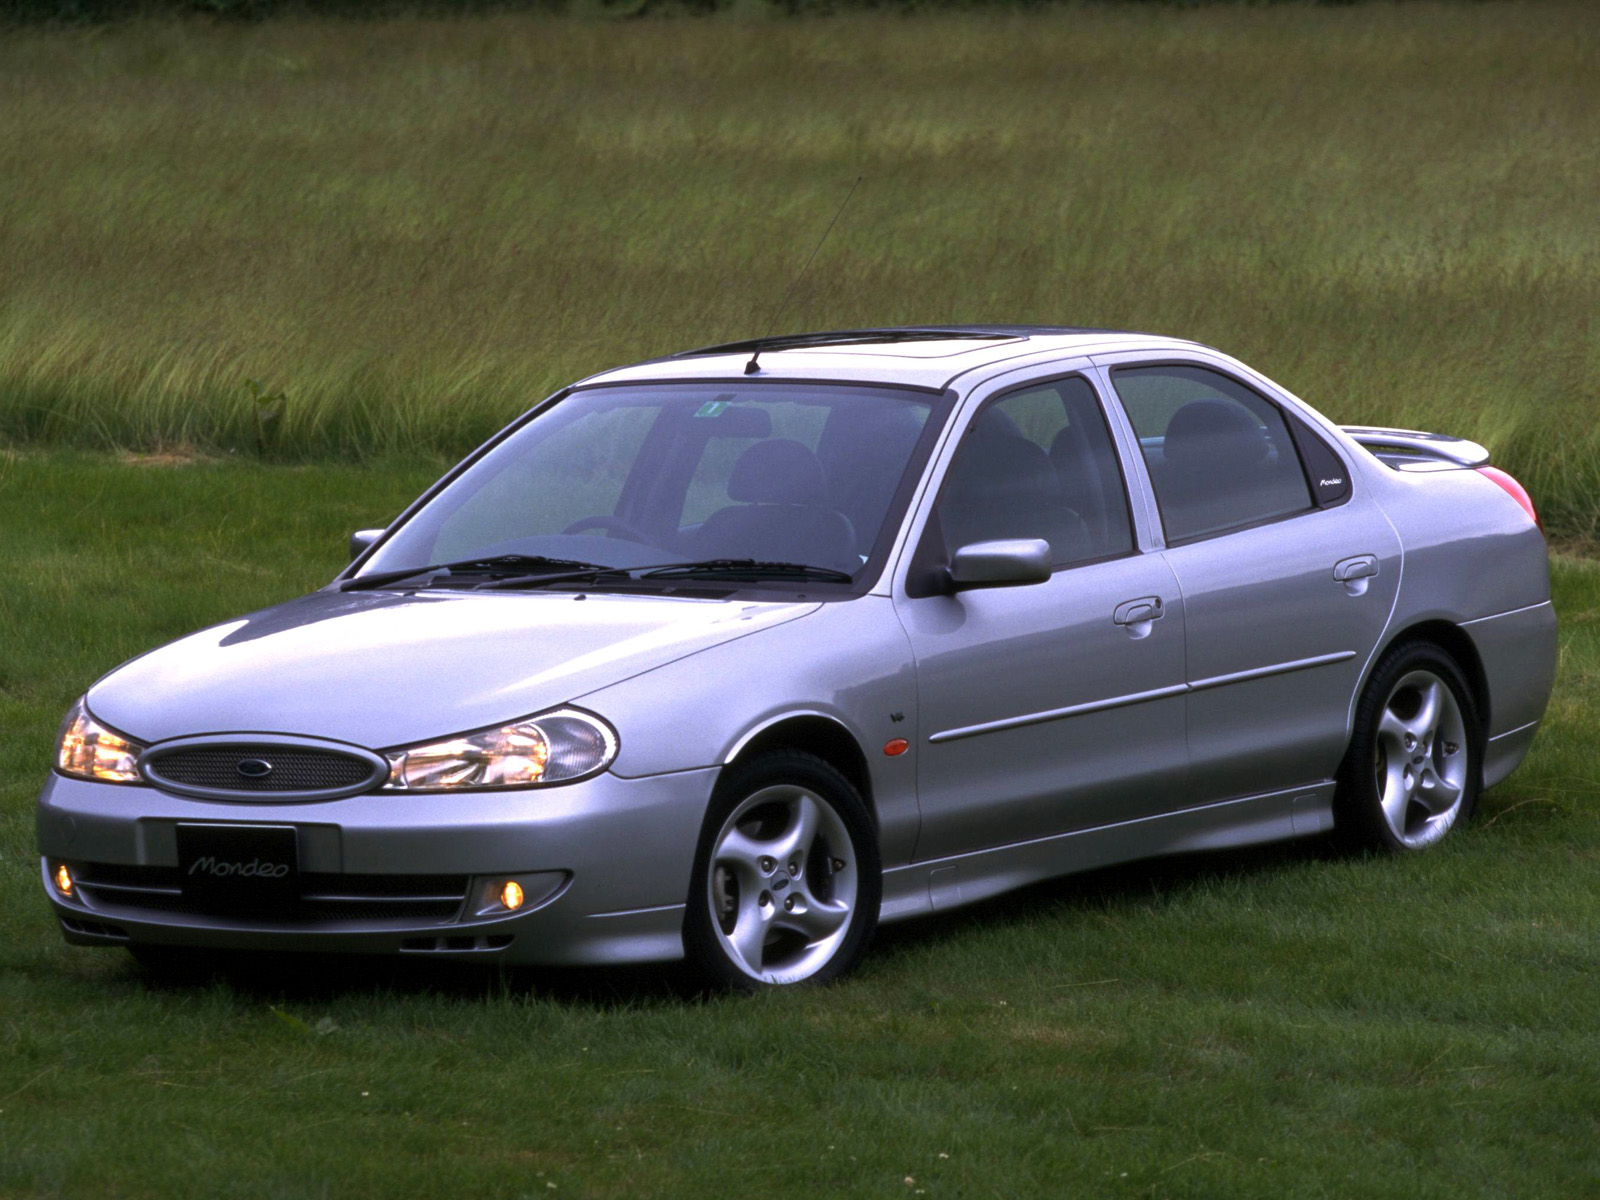 Ford Mondeo 1996 photo - 3